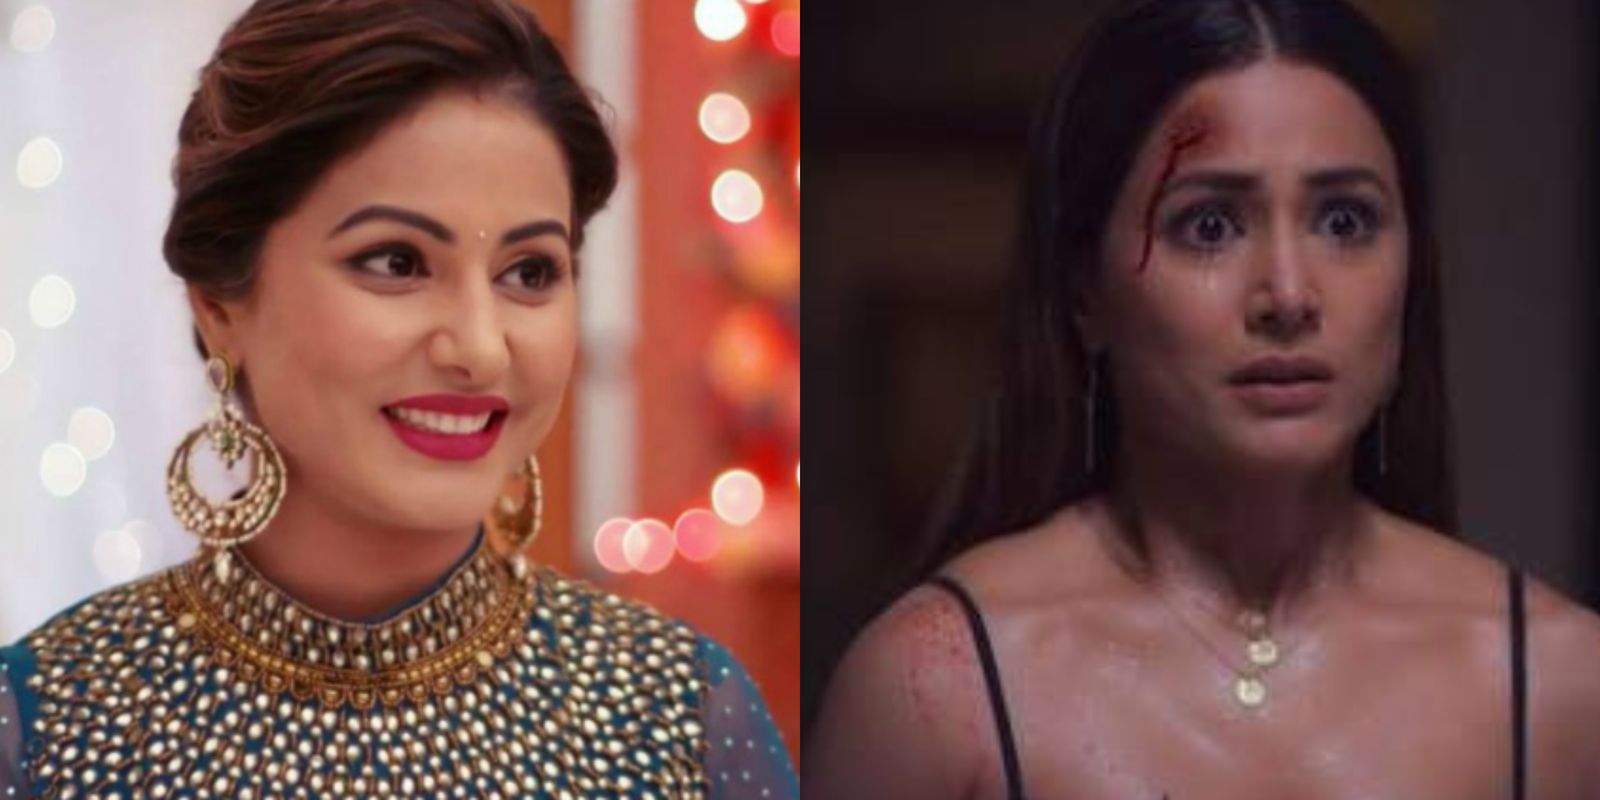 Hina Khan Feels People Wouldn’t Watch TV Unless Actors Give Over-The-Top Reactions, Says She Had To Unlearn That For Films